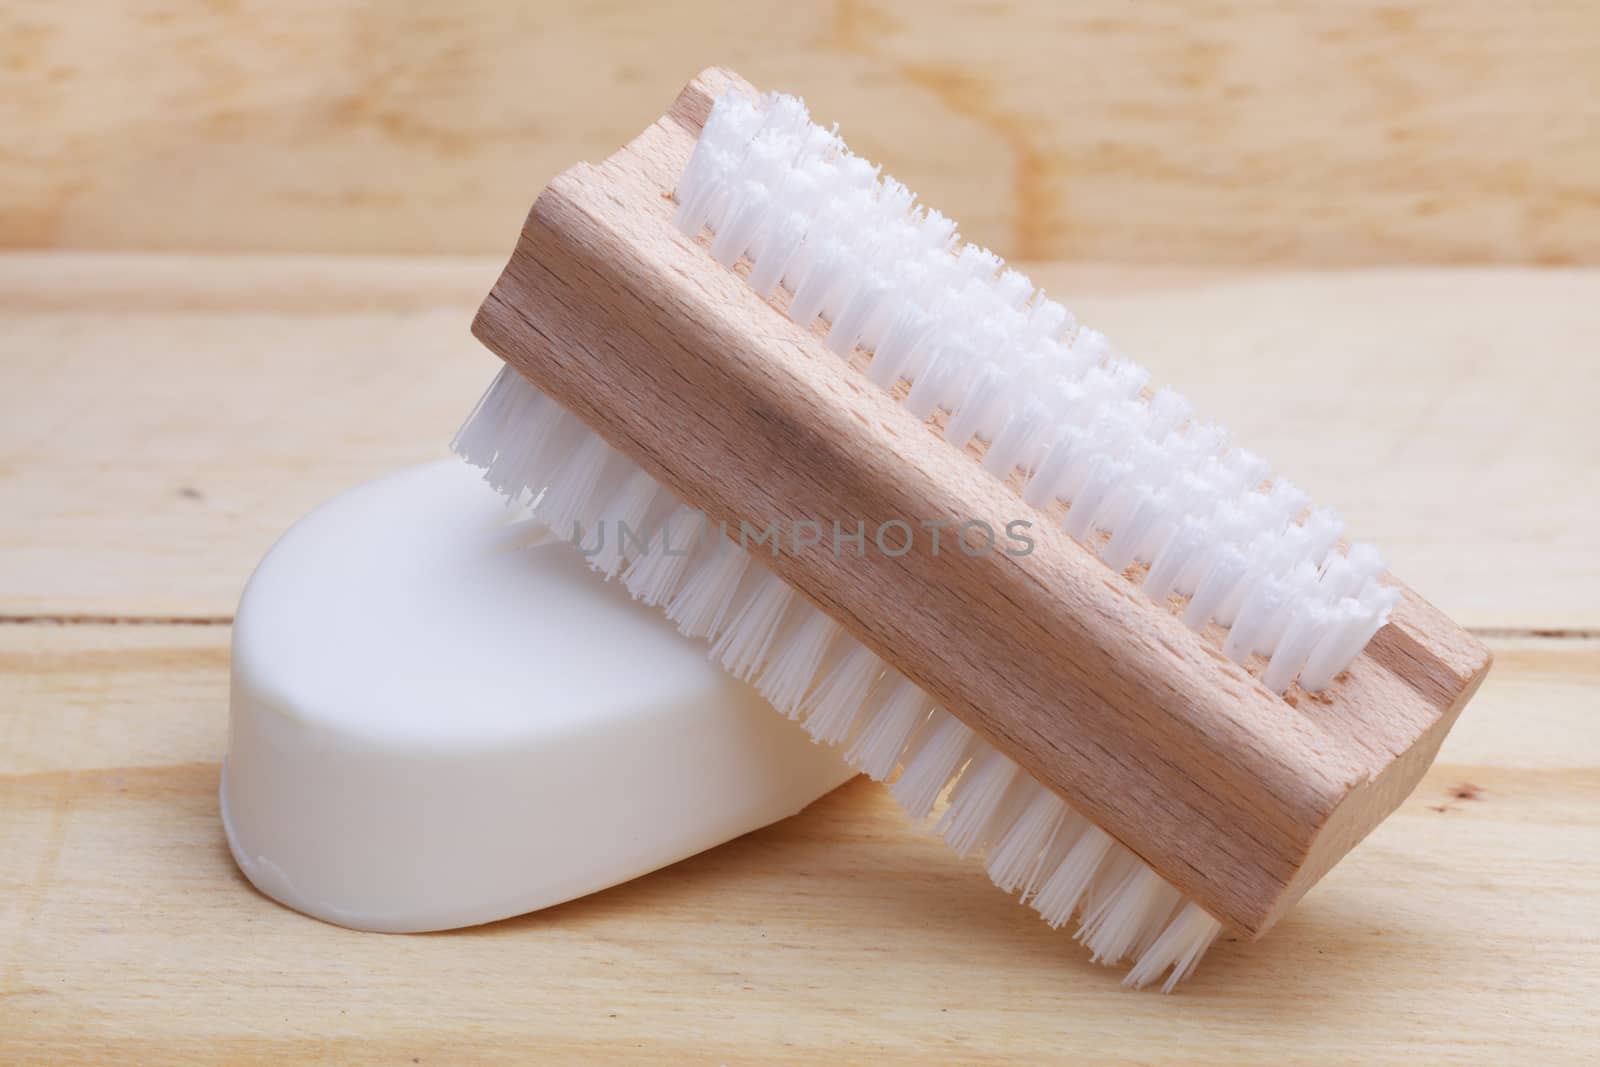 A bar of soap and nail brush on wood surface